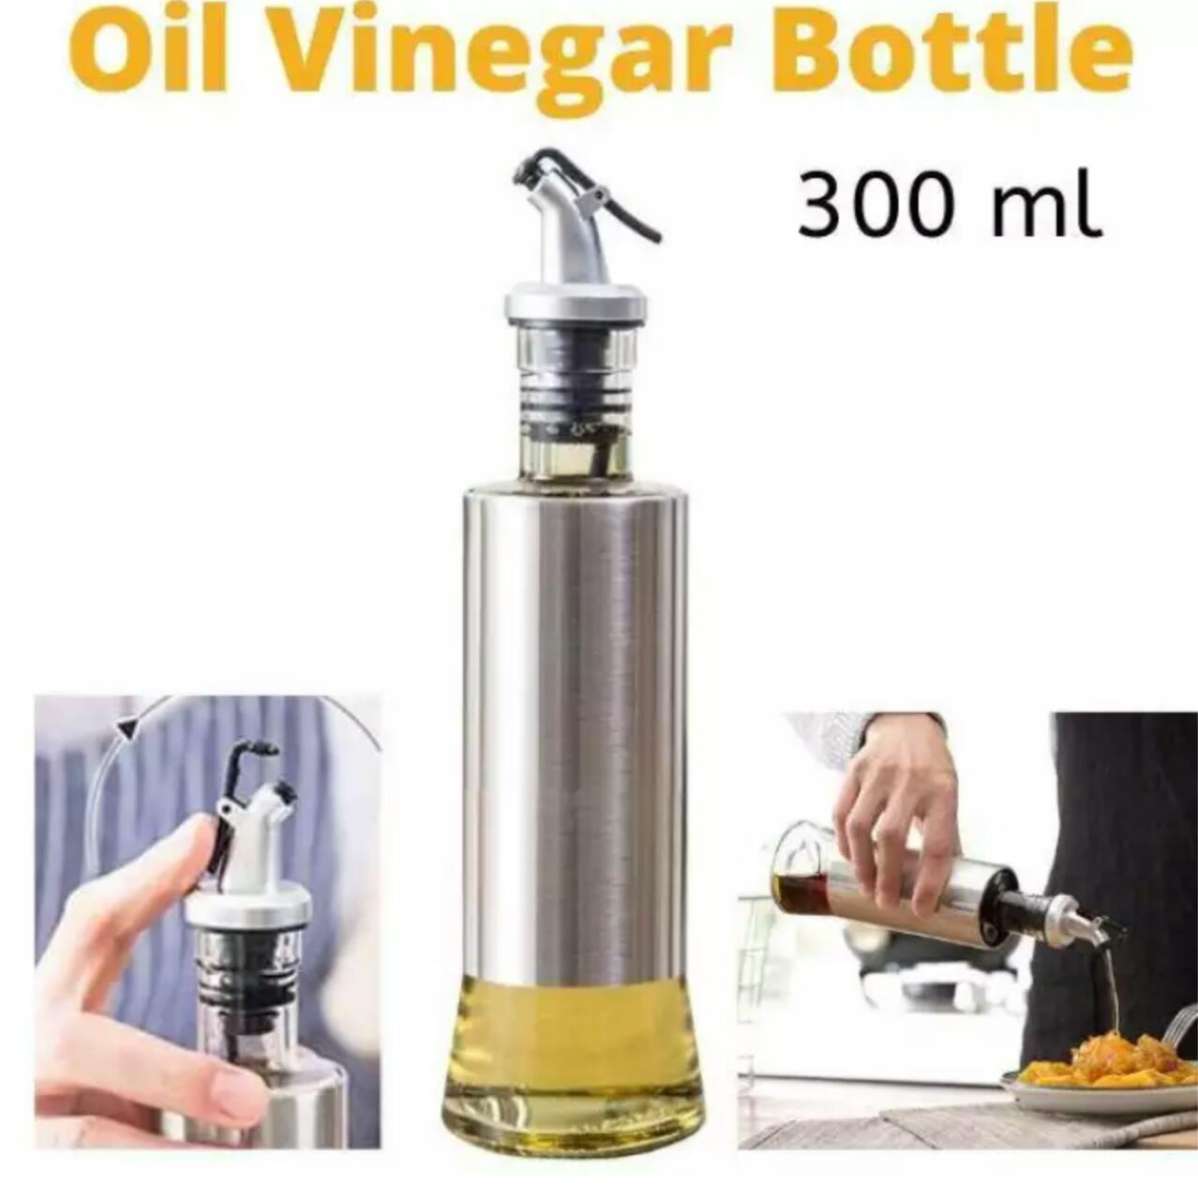 Kitchen Cooking Oil Vinegar Bottle with Dropper Best For Olive oil Usage Glass and Stainless Steel – 300 ml - REVEL.PK